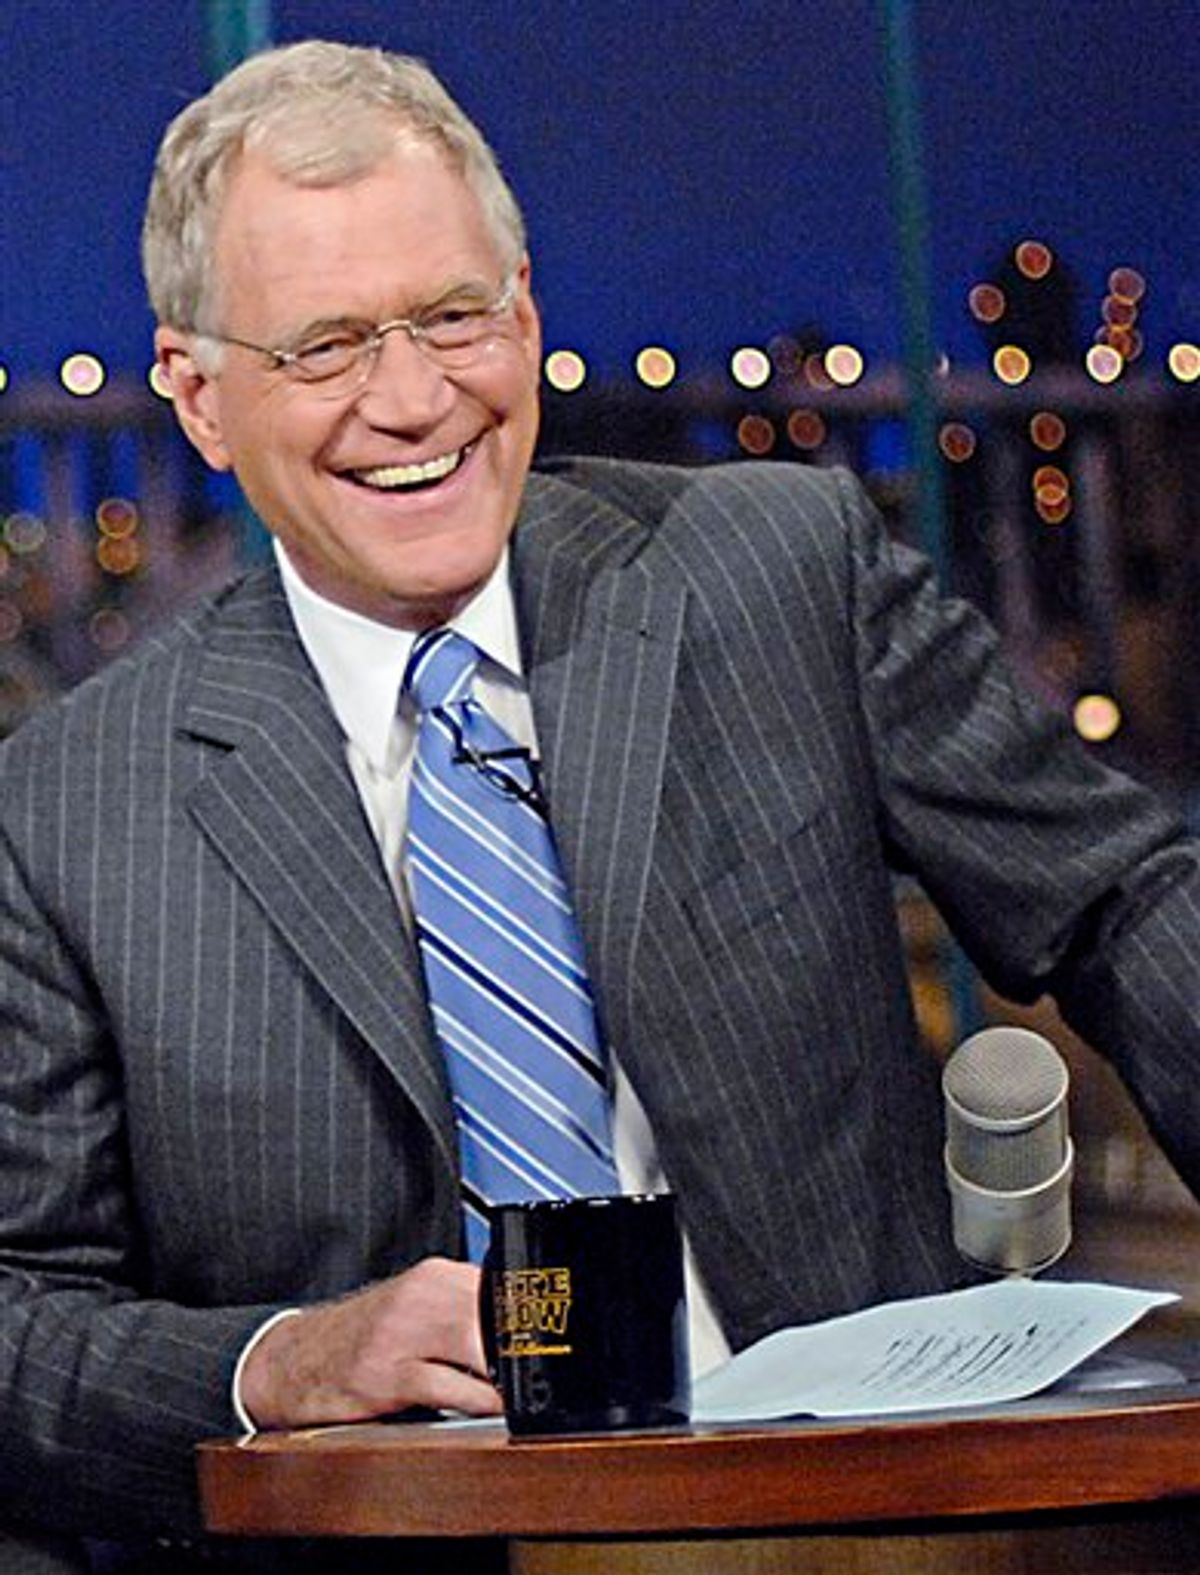 FILE - In this Oct 8, 2007 file photo image originally provided by CBS, David Letterman appears on the "Late Show with David Letterman,"  in New York. (AP Photo/John Paul Filo, CBS, File) ** MANDATORY CREDIT; NO SALES; NO ARCHIVE; NORTH AMERICA USE ONLY ** (AP)